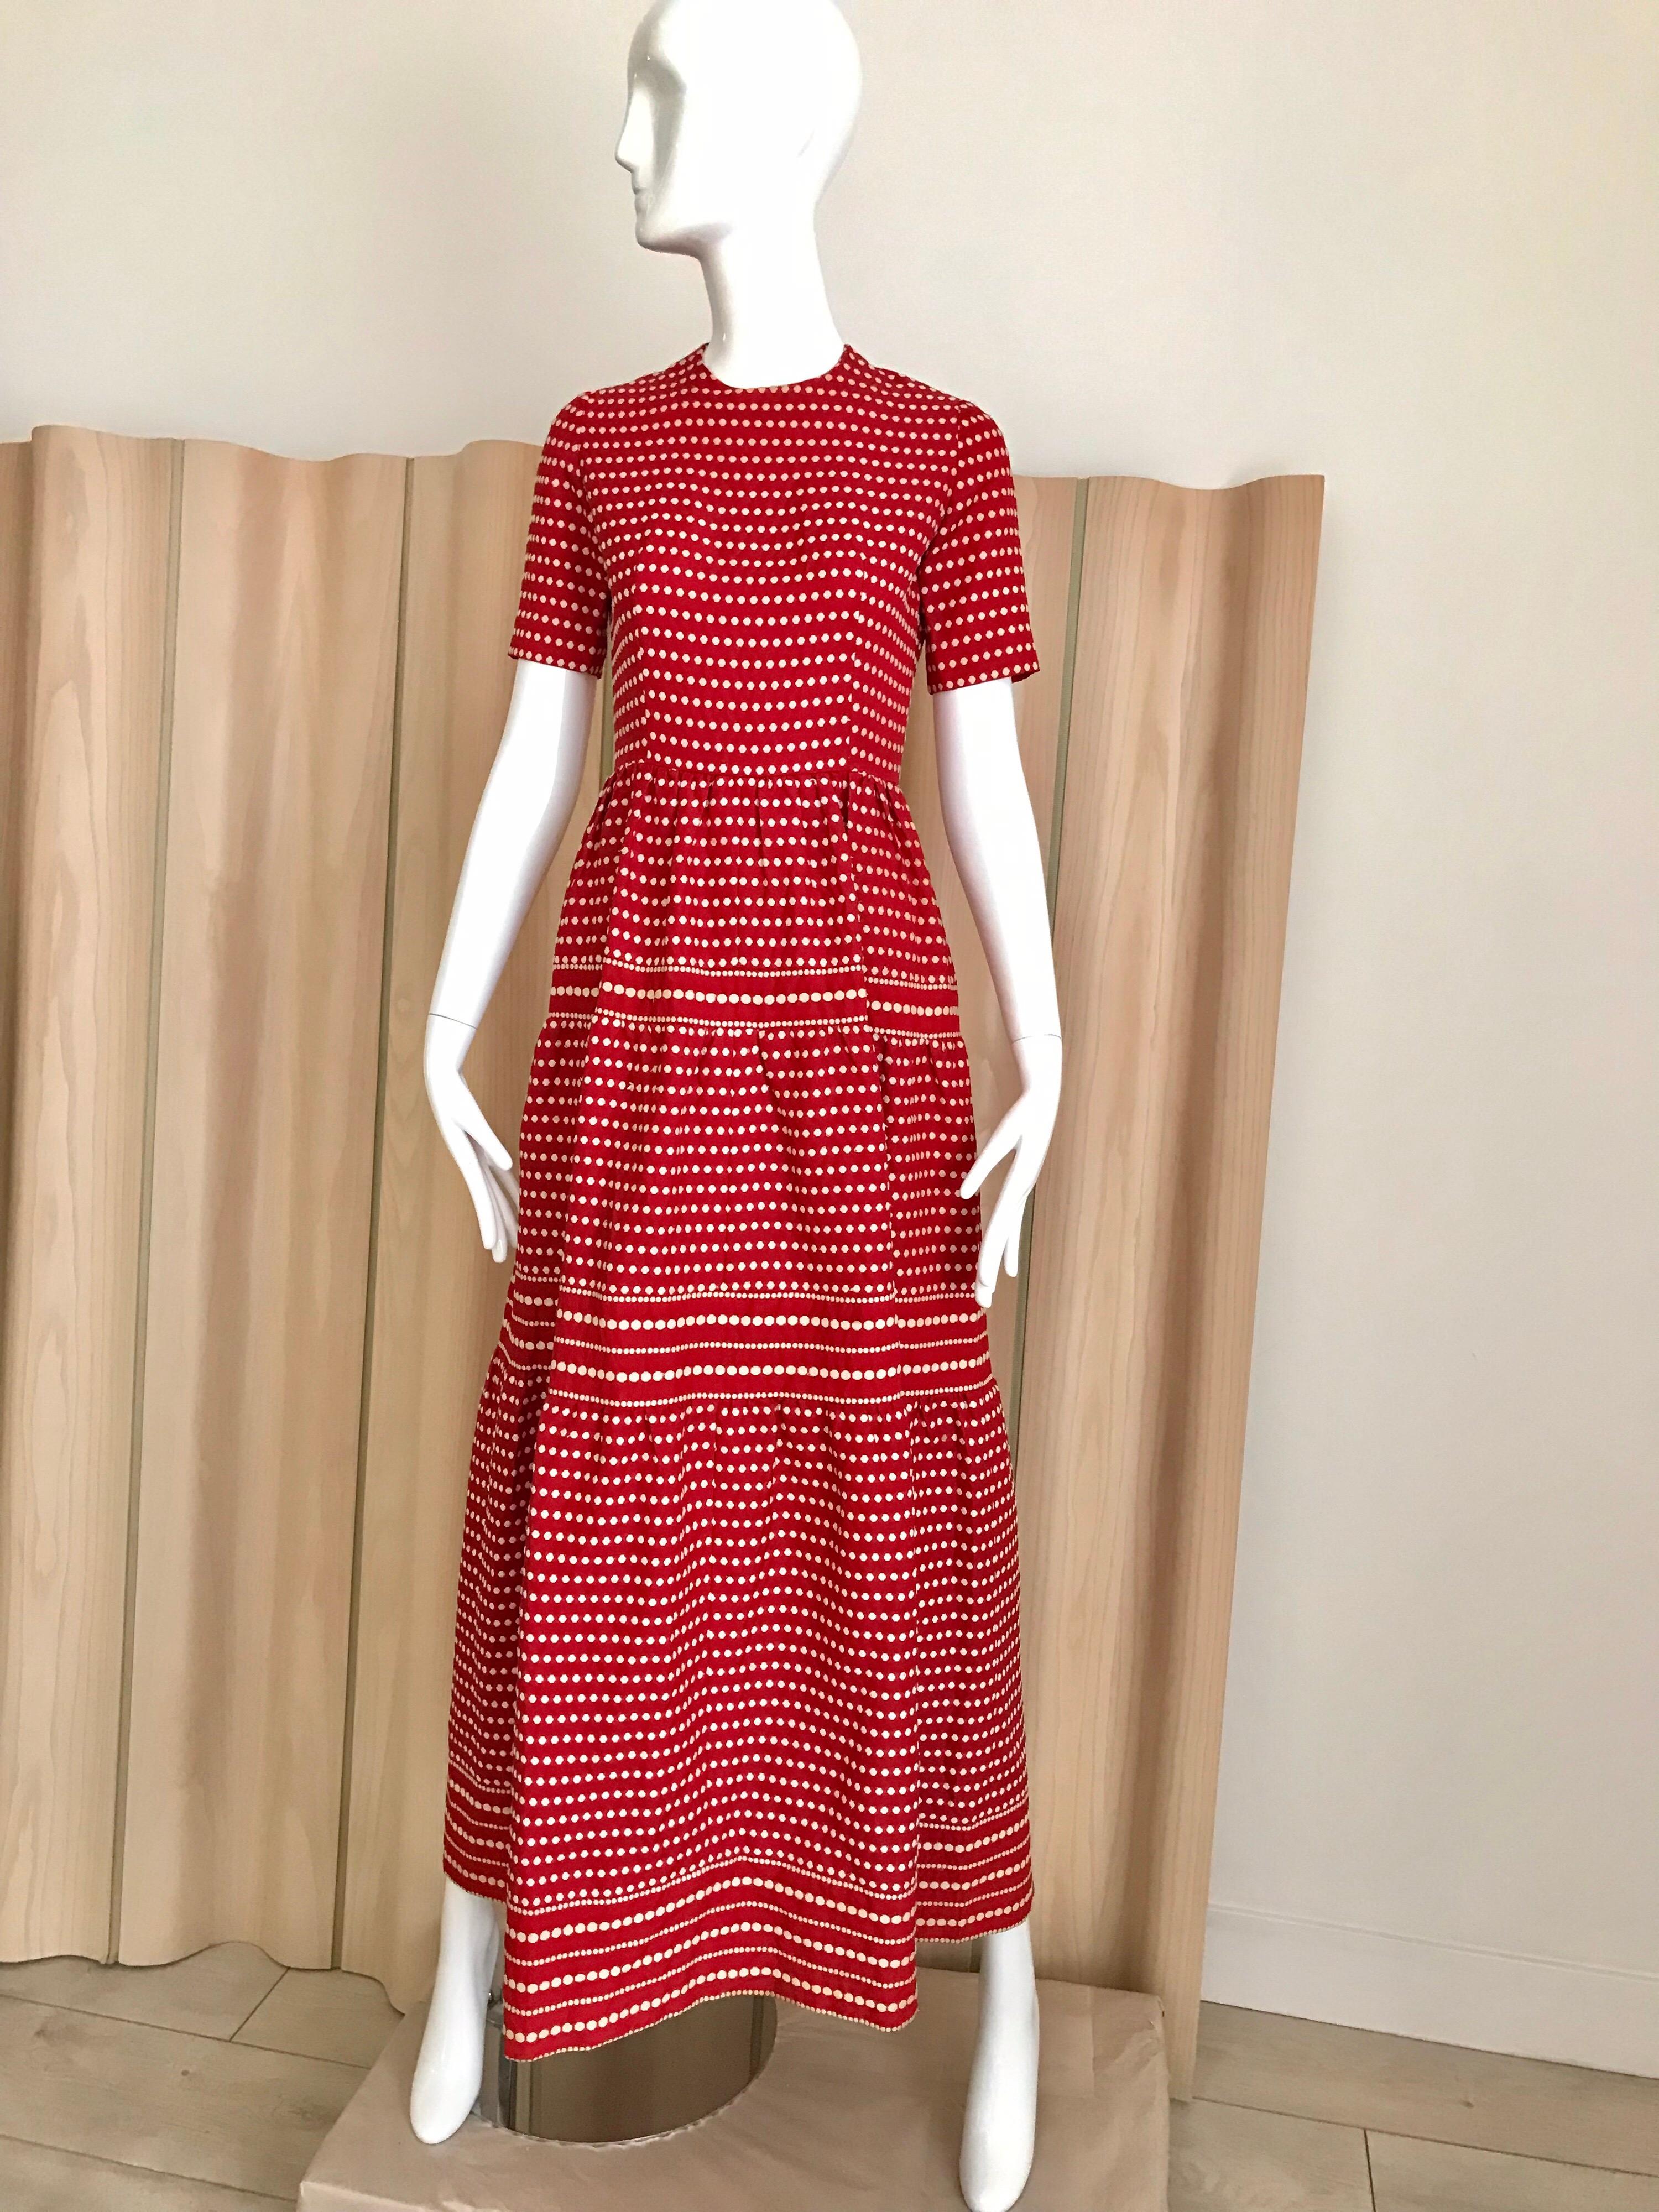 Vintage Dior by Marc Bohan red silk dress with white dots. 
Size : XS/ S
Measurement : 
32” Bust / 24” waist 